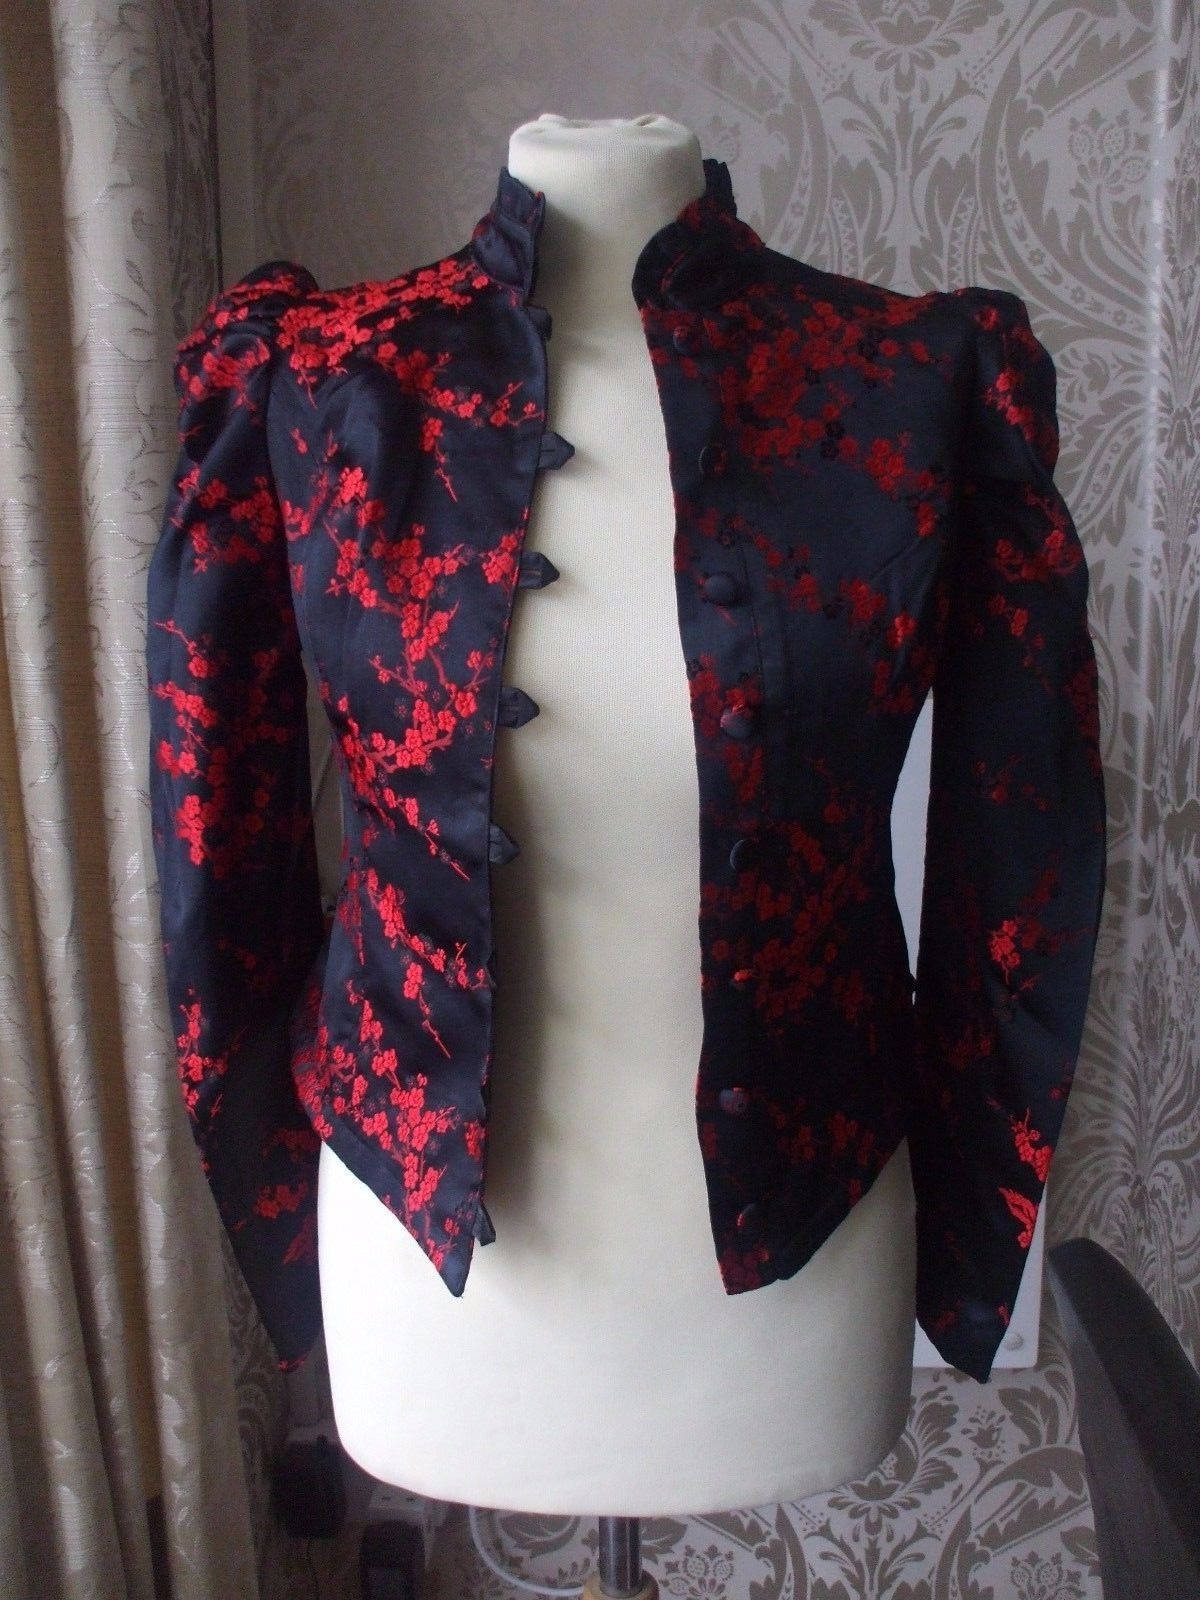 Ladies Gothic Rock a Billy Top Shirt Hell Bunny Black Red roses Brocade Size 10 Wonkey Donkey Bazaar